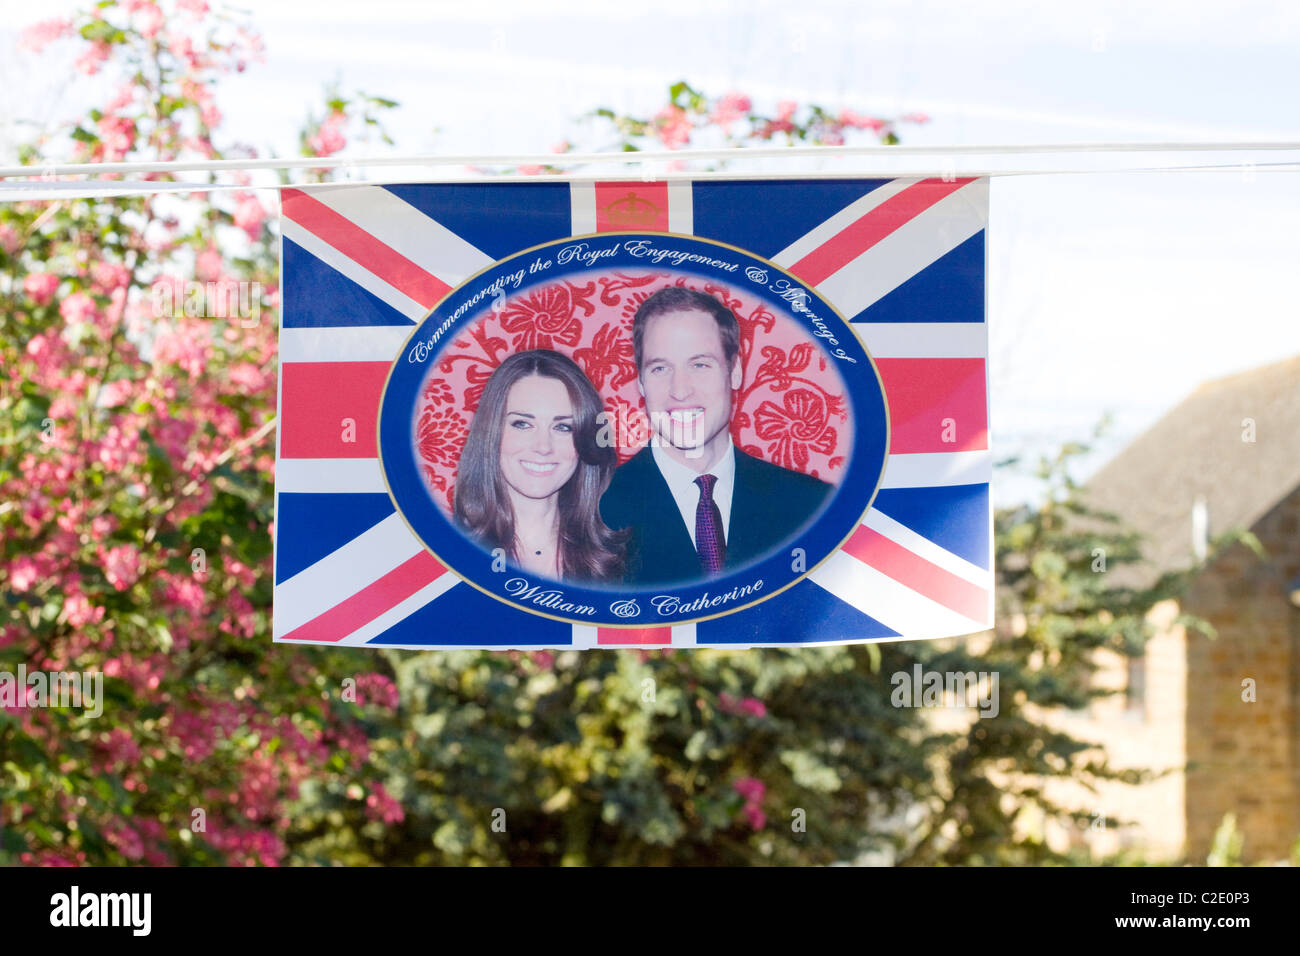 Flag Commemorating the Wedding of Prince William of Wales and Kate Middleton 29th April 2011 Stock Photo